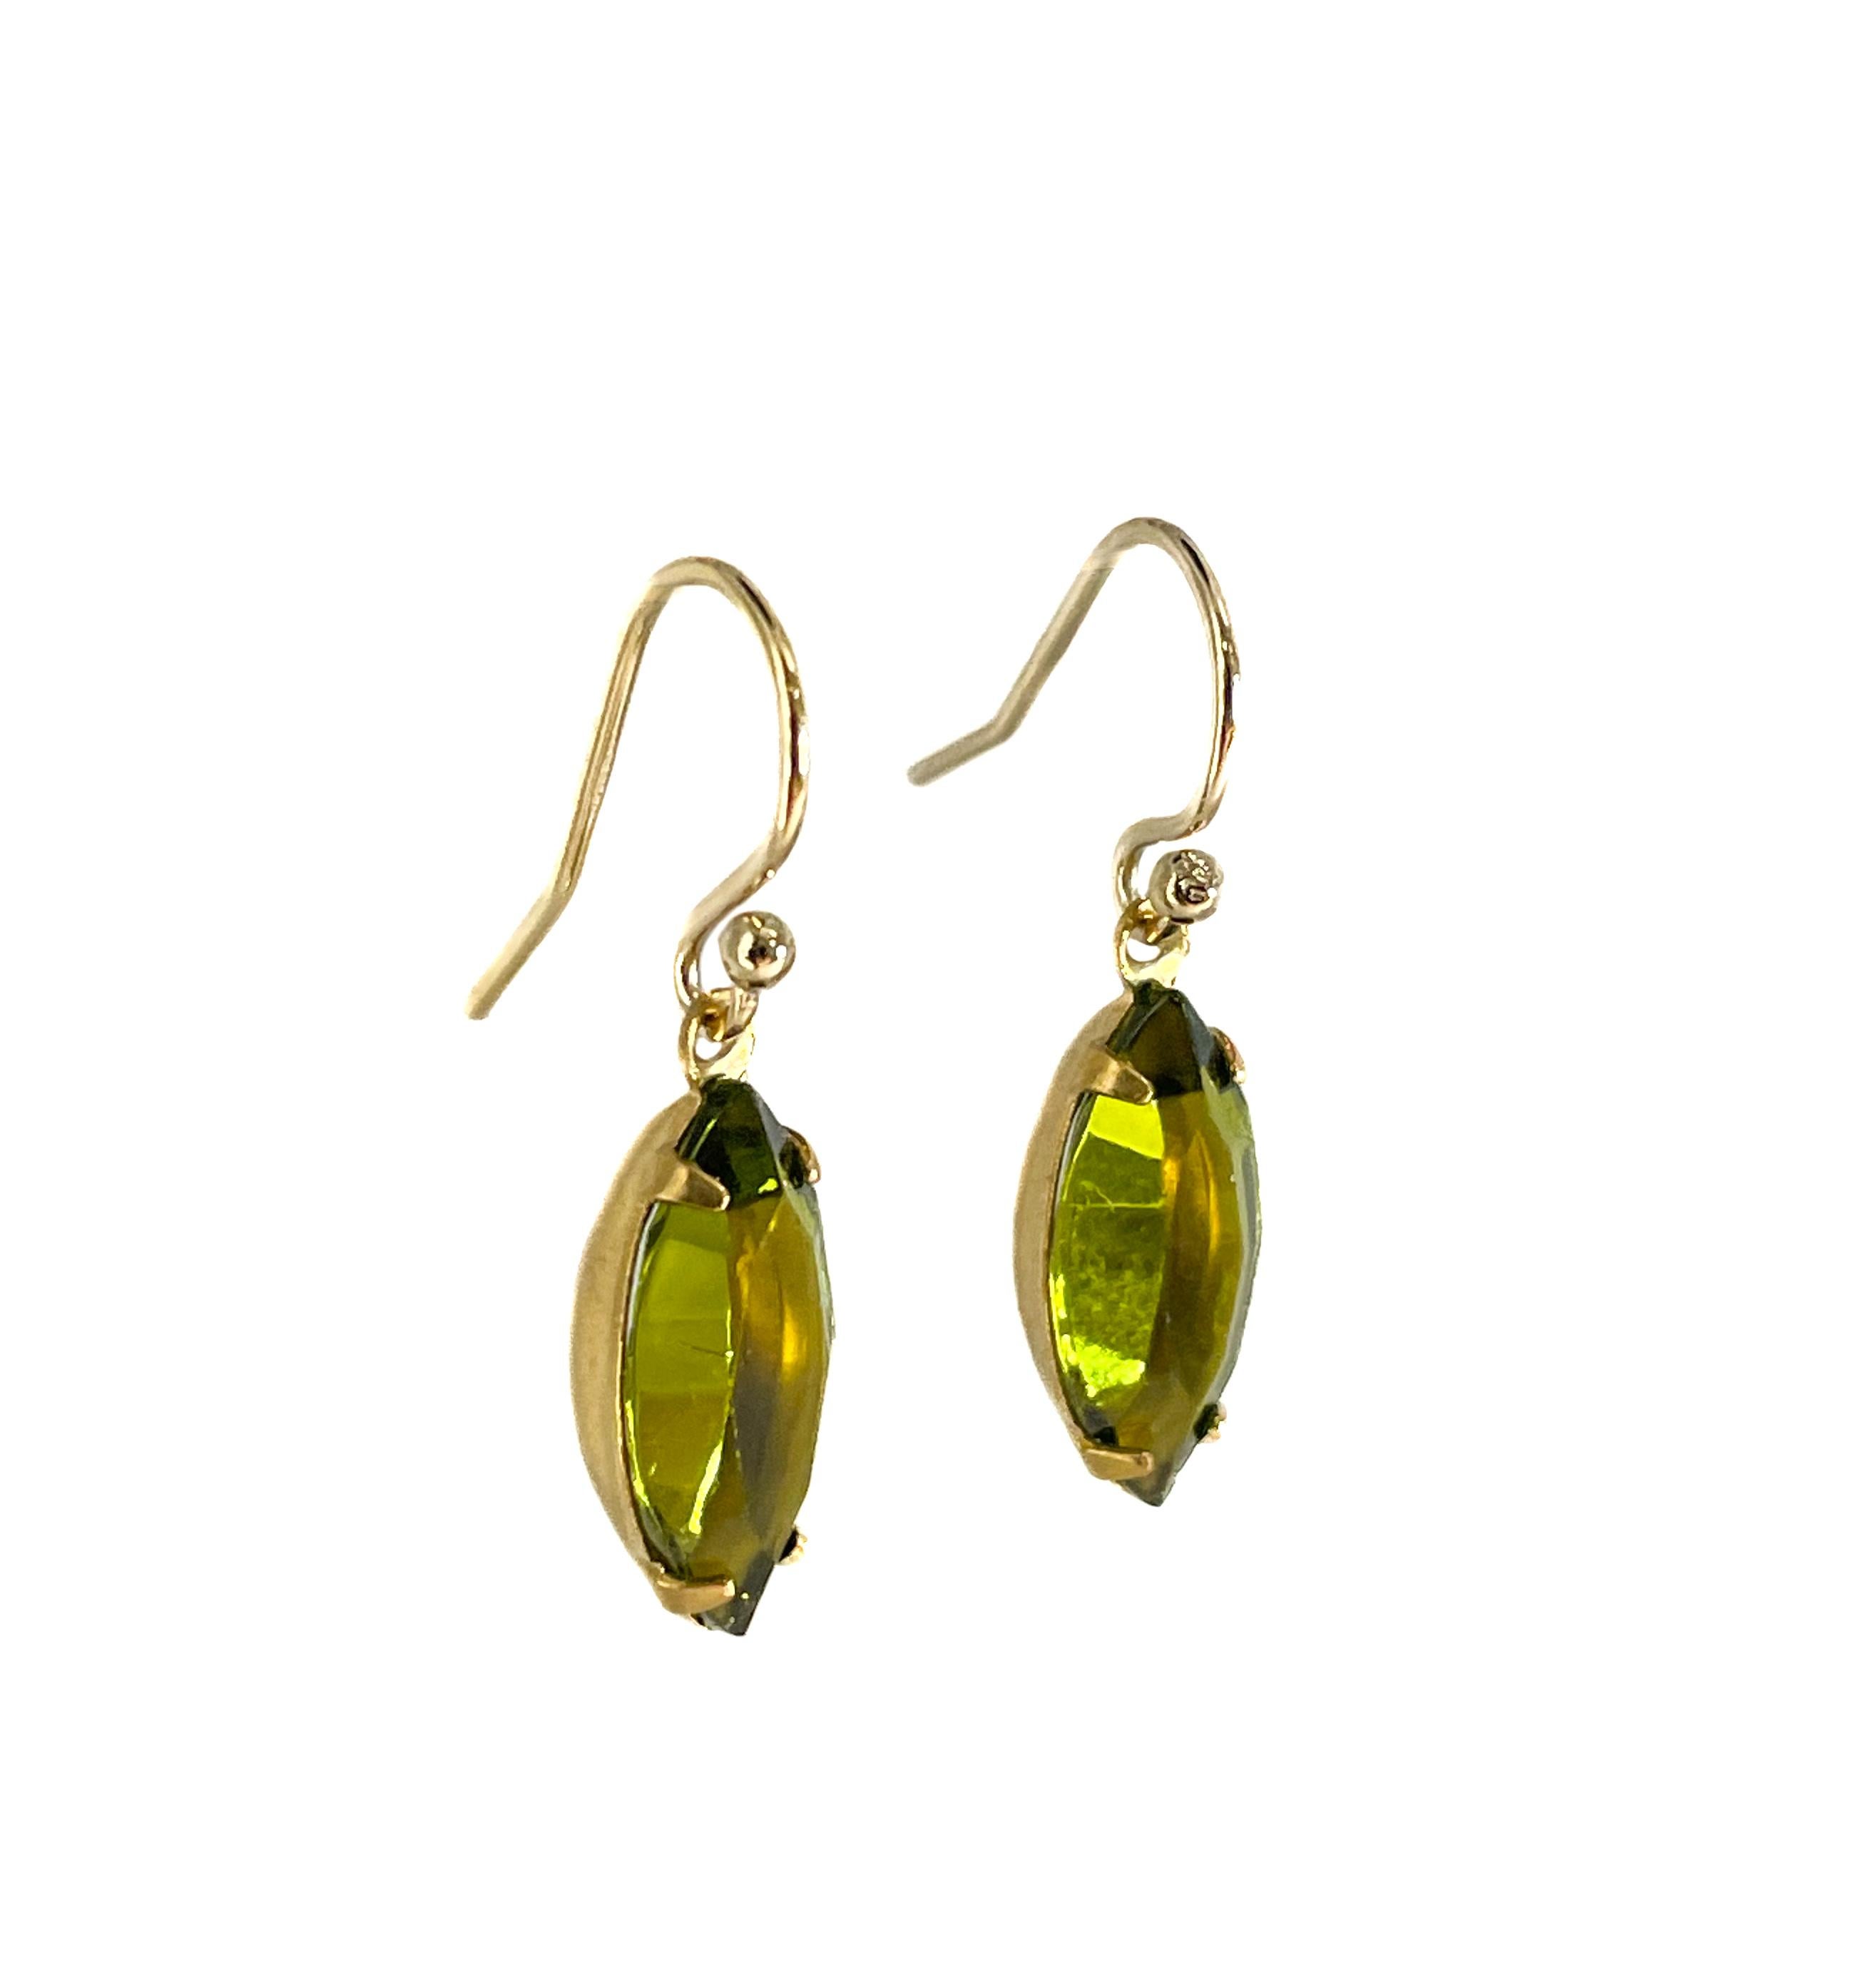 These delicate and elegant drop earrings are made from vintage crystal from Czech Republic. The crystal is made to resemble olivine. 

Each crystal drop measures 15 x 7 mm. They are set in an original brass prong setting. They are hanging from a